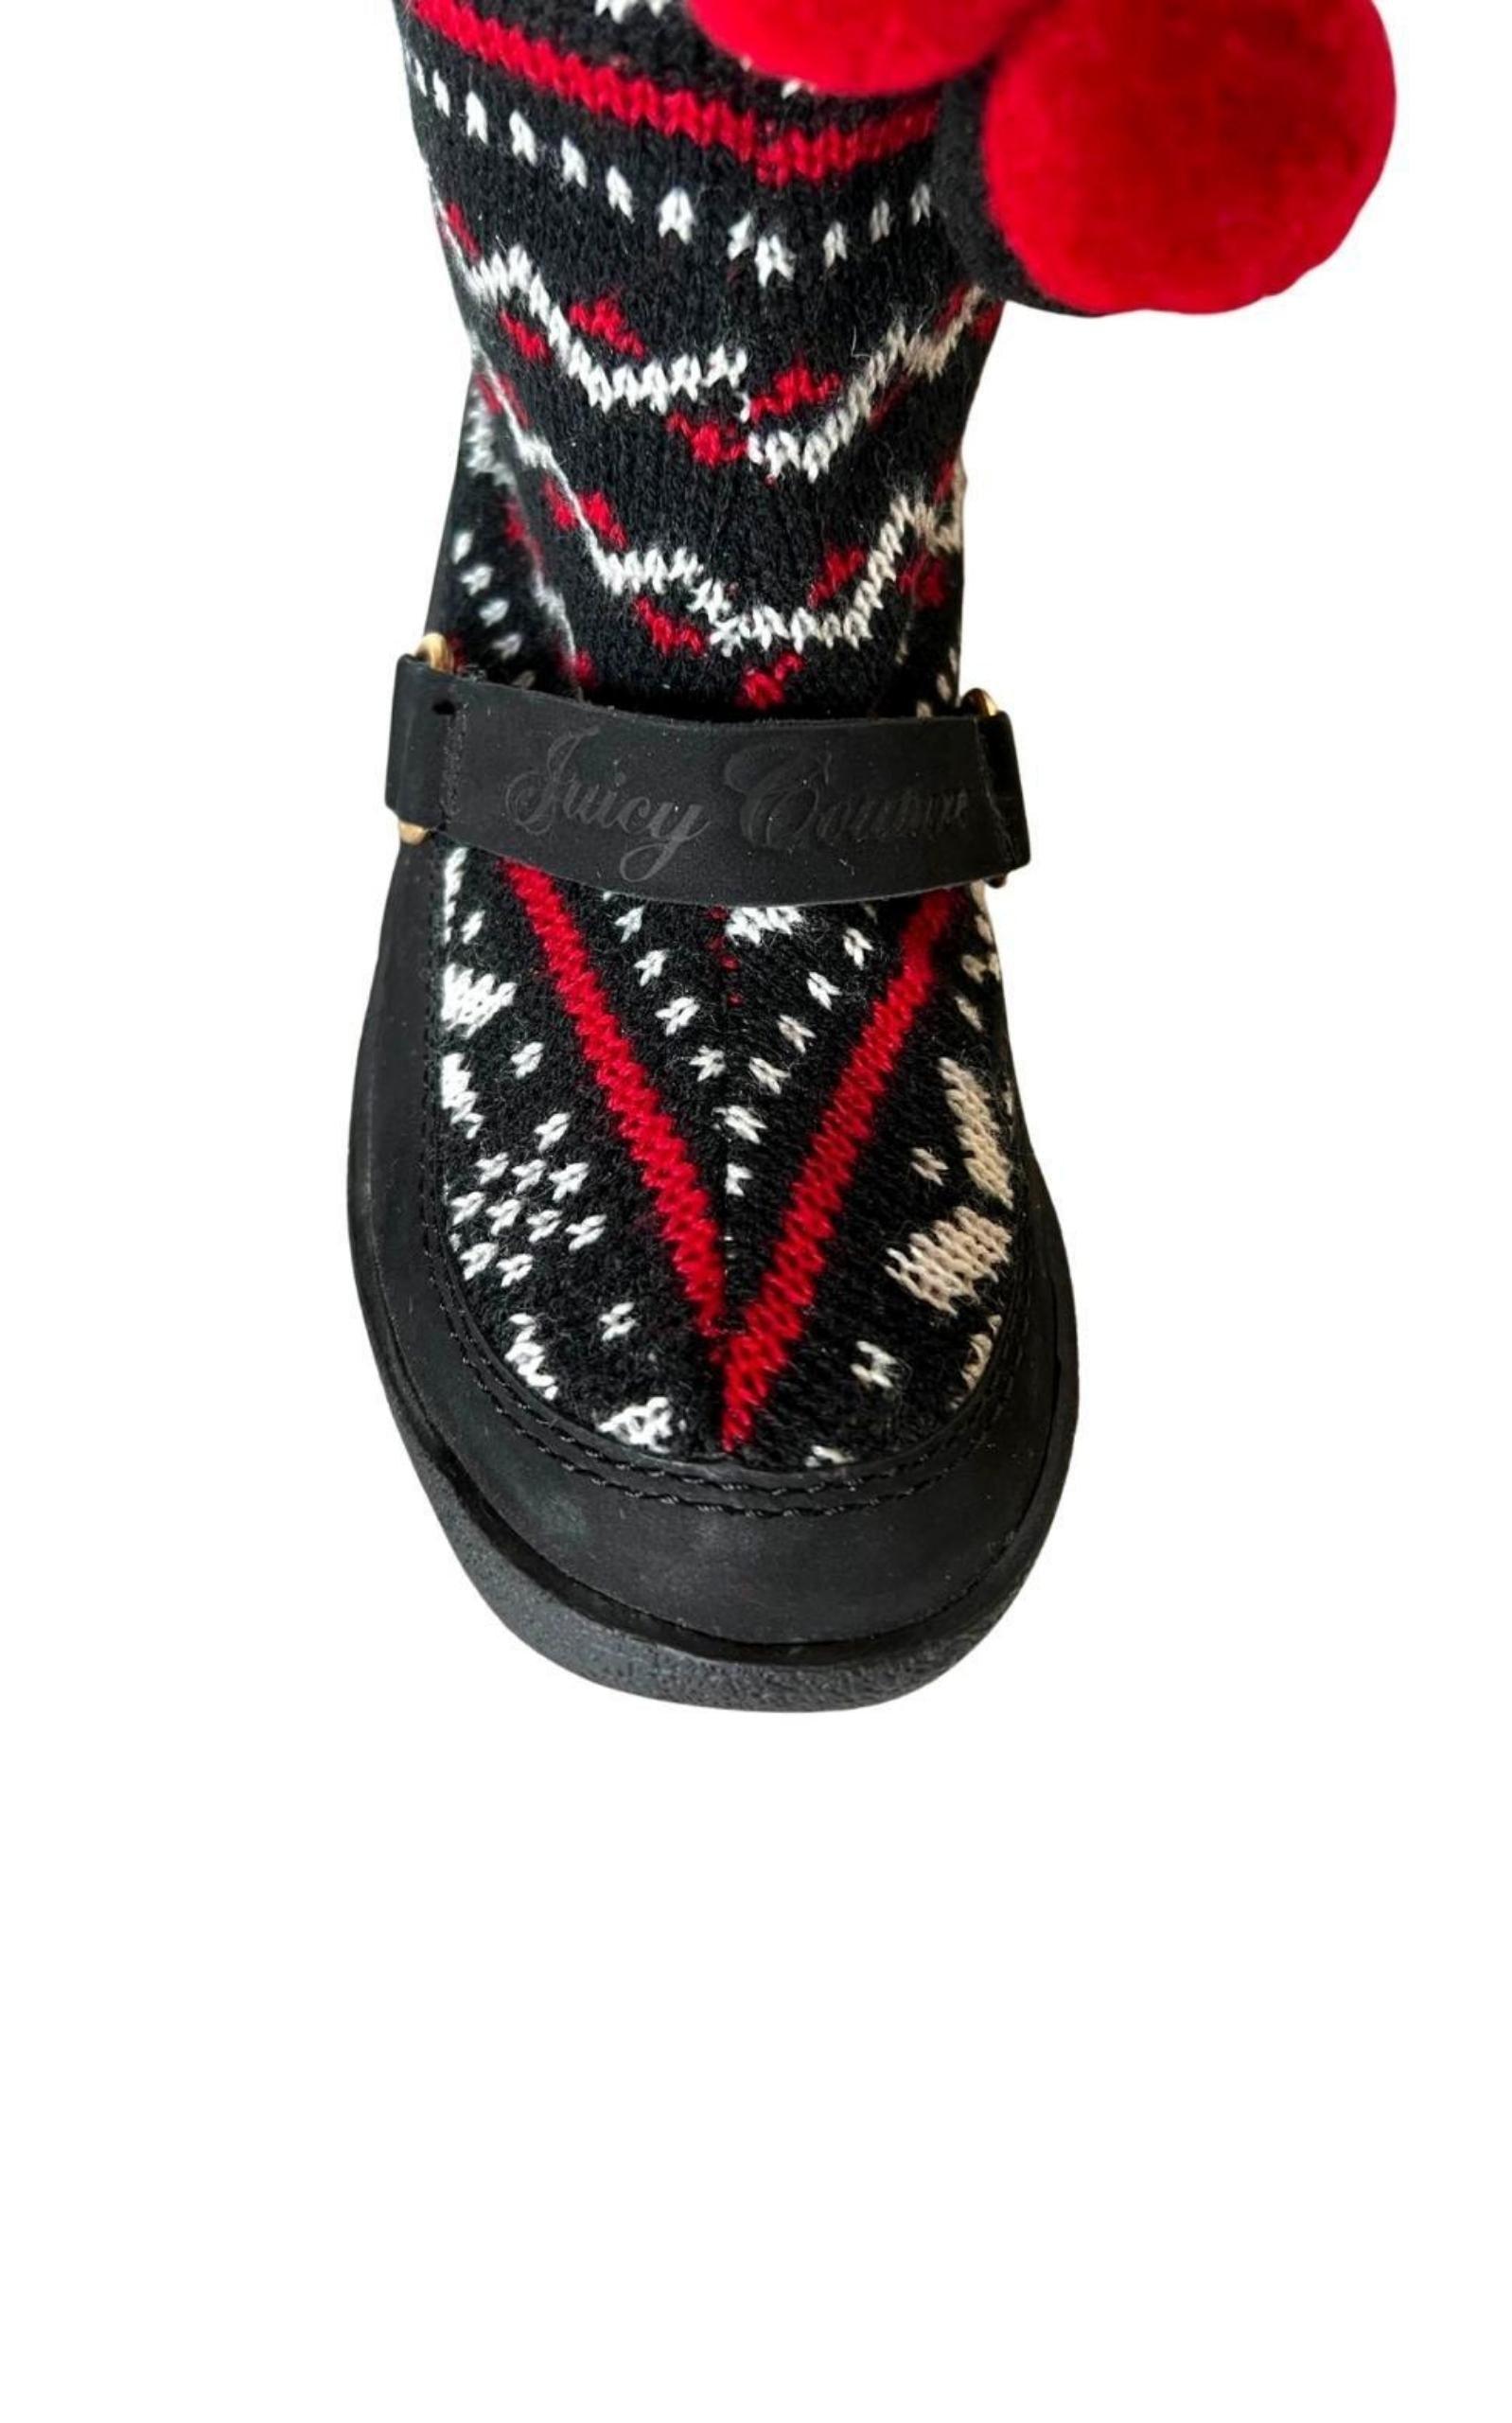  Juicy CoutureRed Black White Tall Snow Boots - Runway Catalog